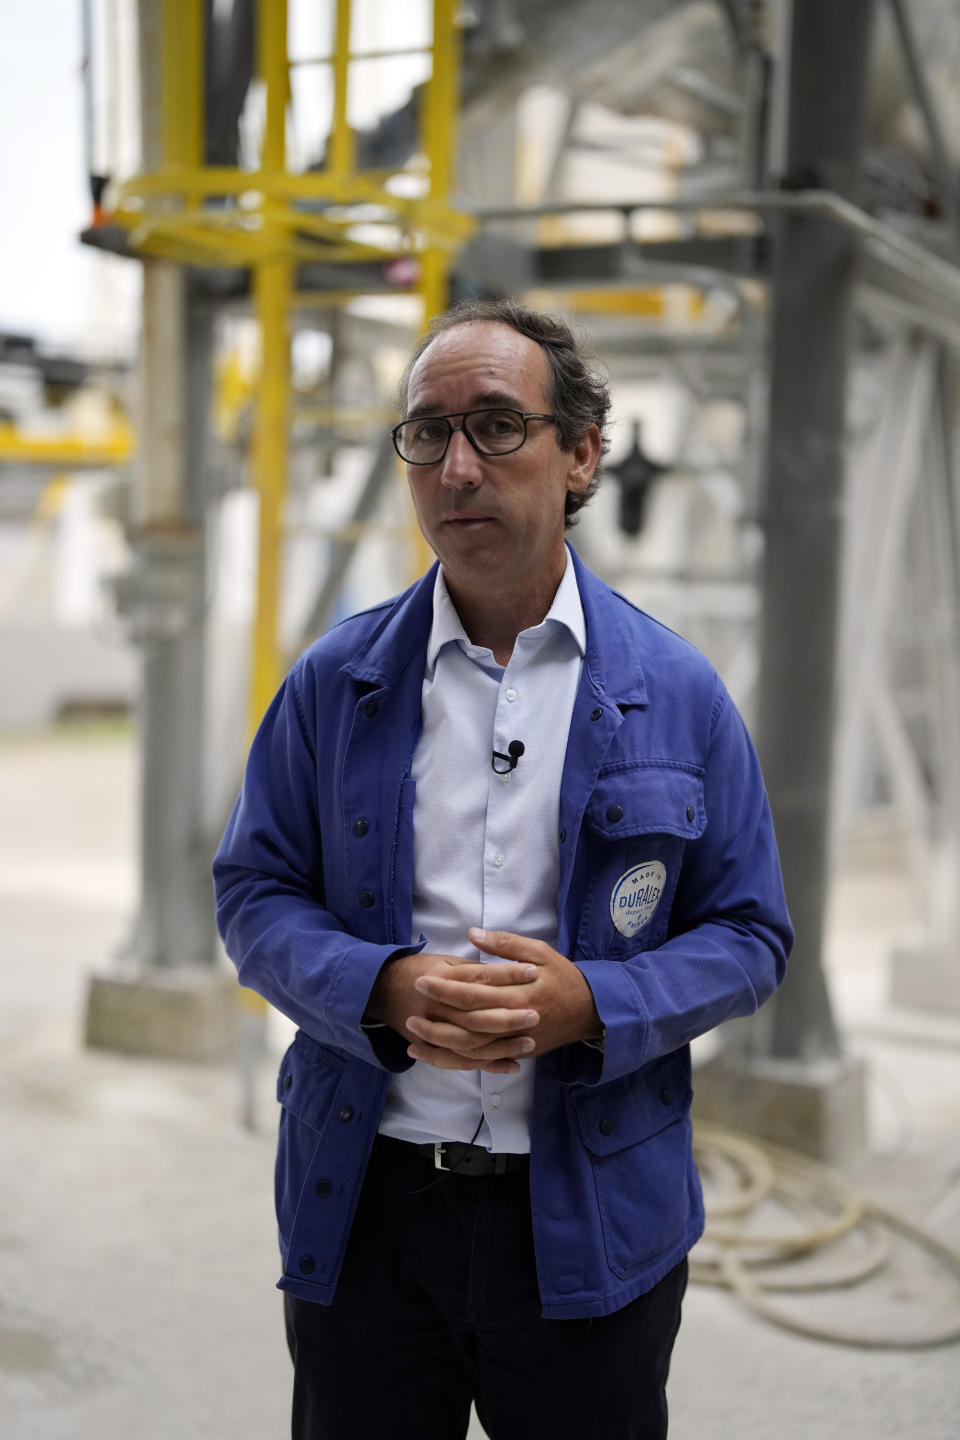 Duralex CEO, Jose Luis Llacuna, talks to The Associated Press outside the factory of the French glassmaker Duralex, in La Chapelle Saint-Mesmin, central France, Wednesday, Sept. 7, 2022. Iconic French tableware brand Duralex is joining a growing array of European firms that are reducing and halting production because of soaring energy costs. (AP Photo/Thibault Camus)